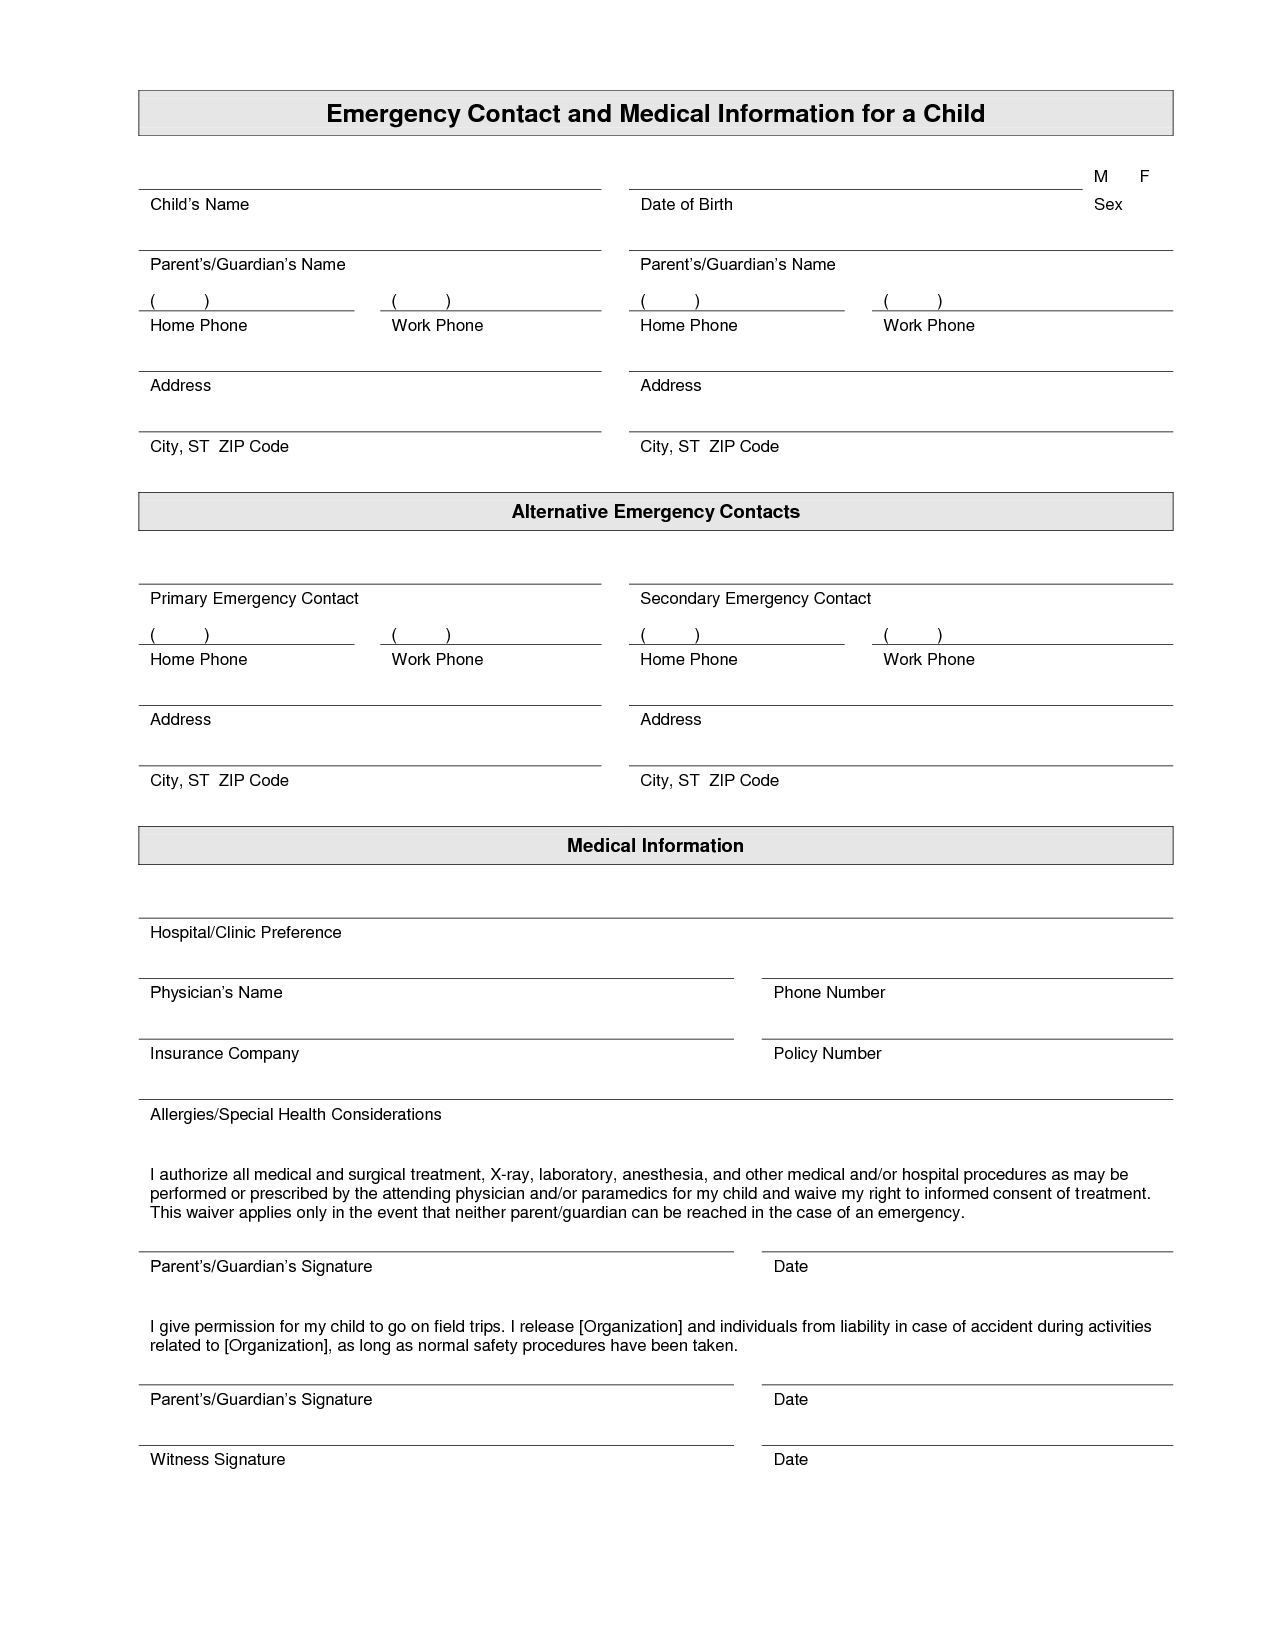 7-best-images-of-printable-employee-emergency-contact-list-free